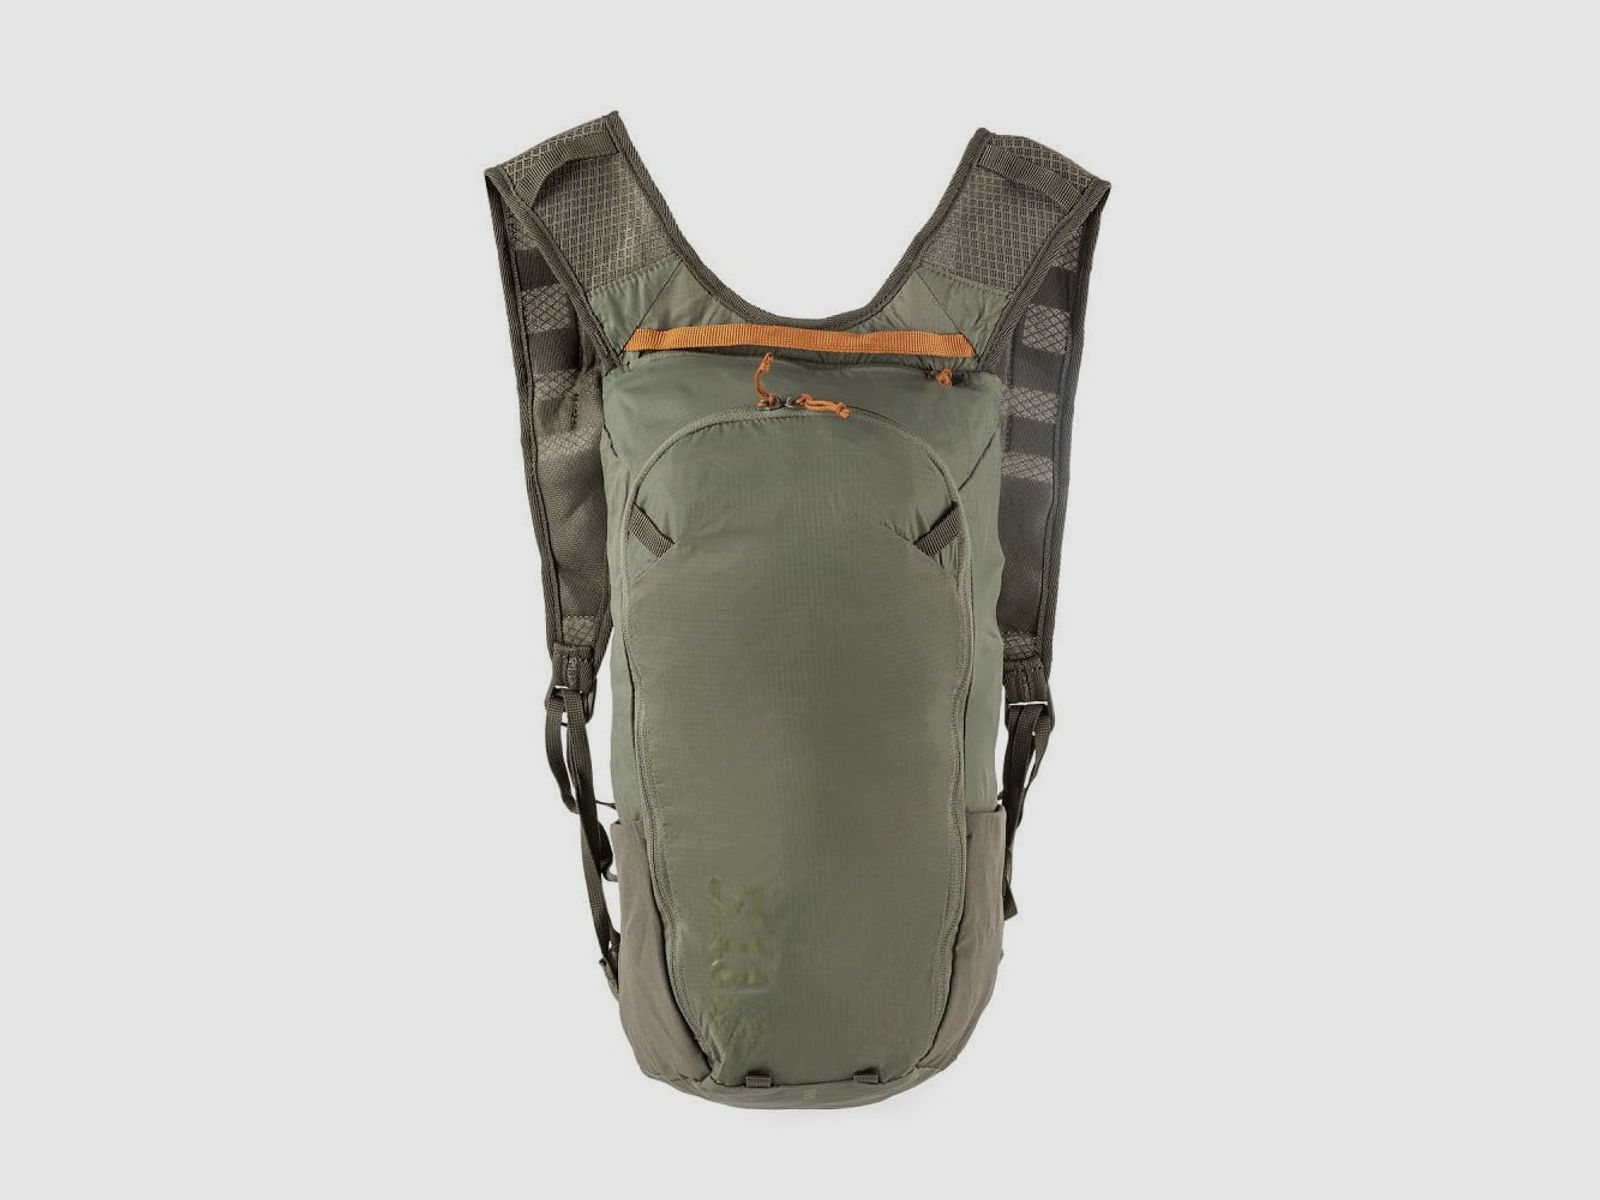 5.11 Tactical MOLLE PACKABLE Rucksack Sage Green